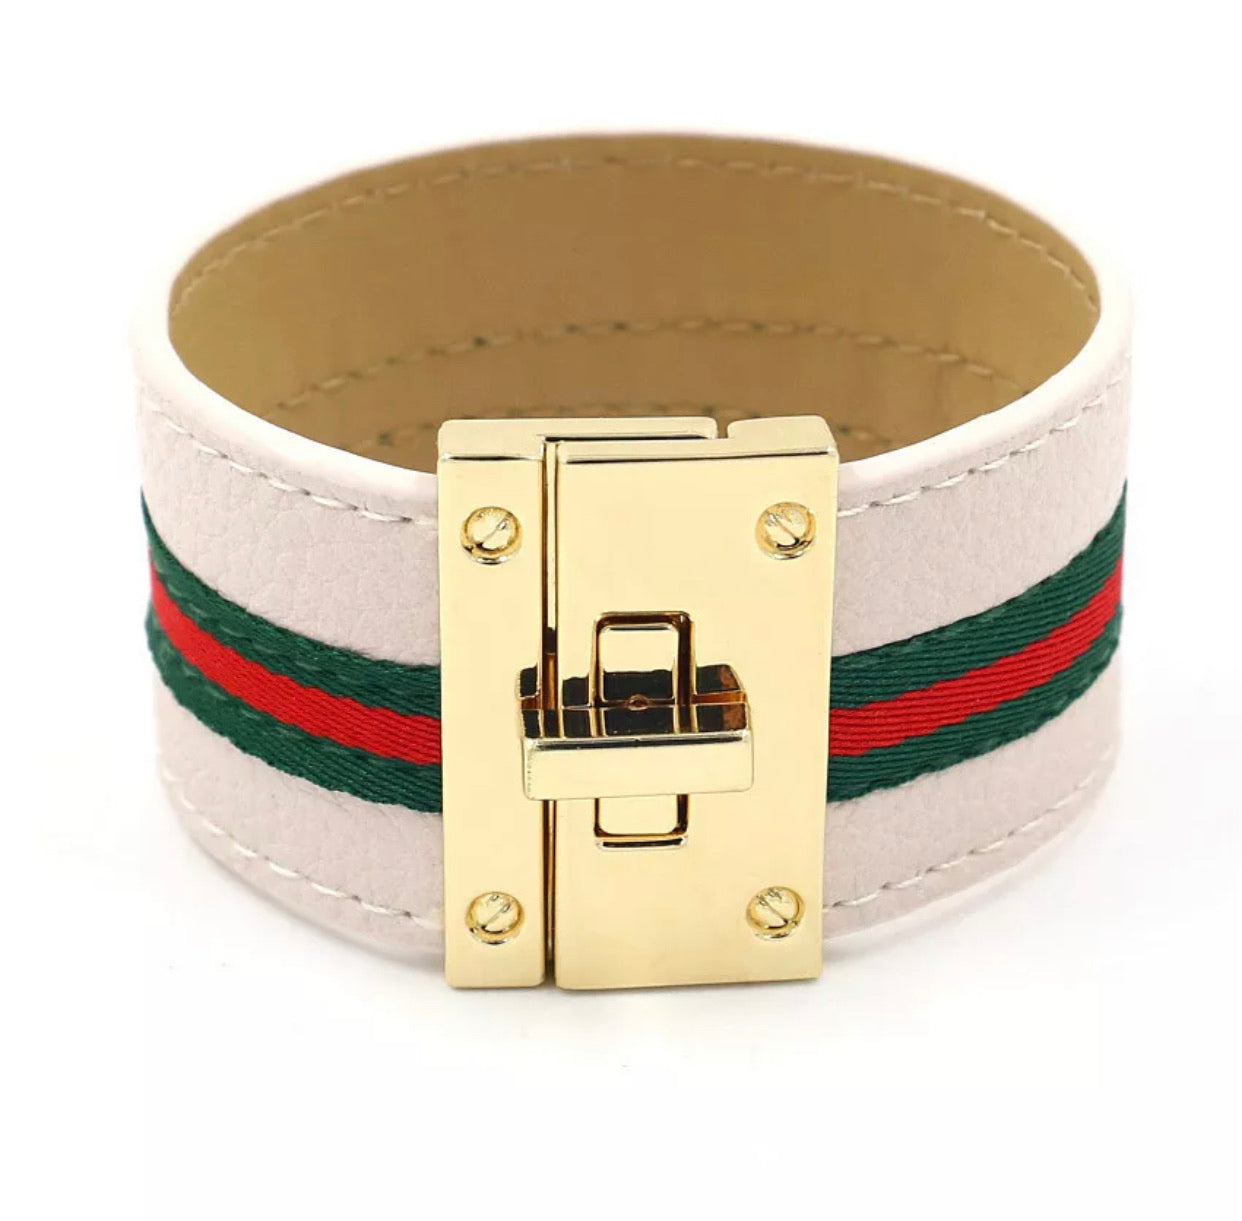 White Leather Cuff Bracelet with a Golden Buckle